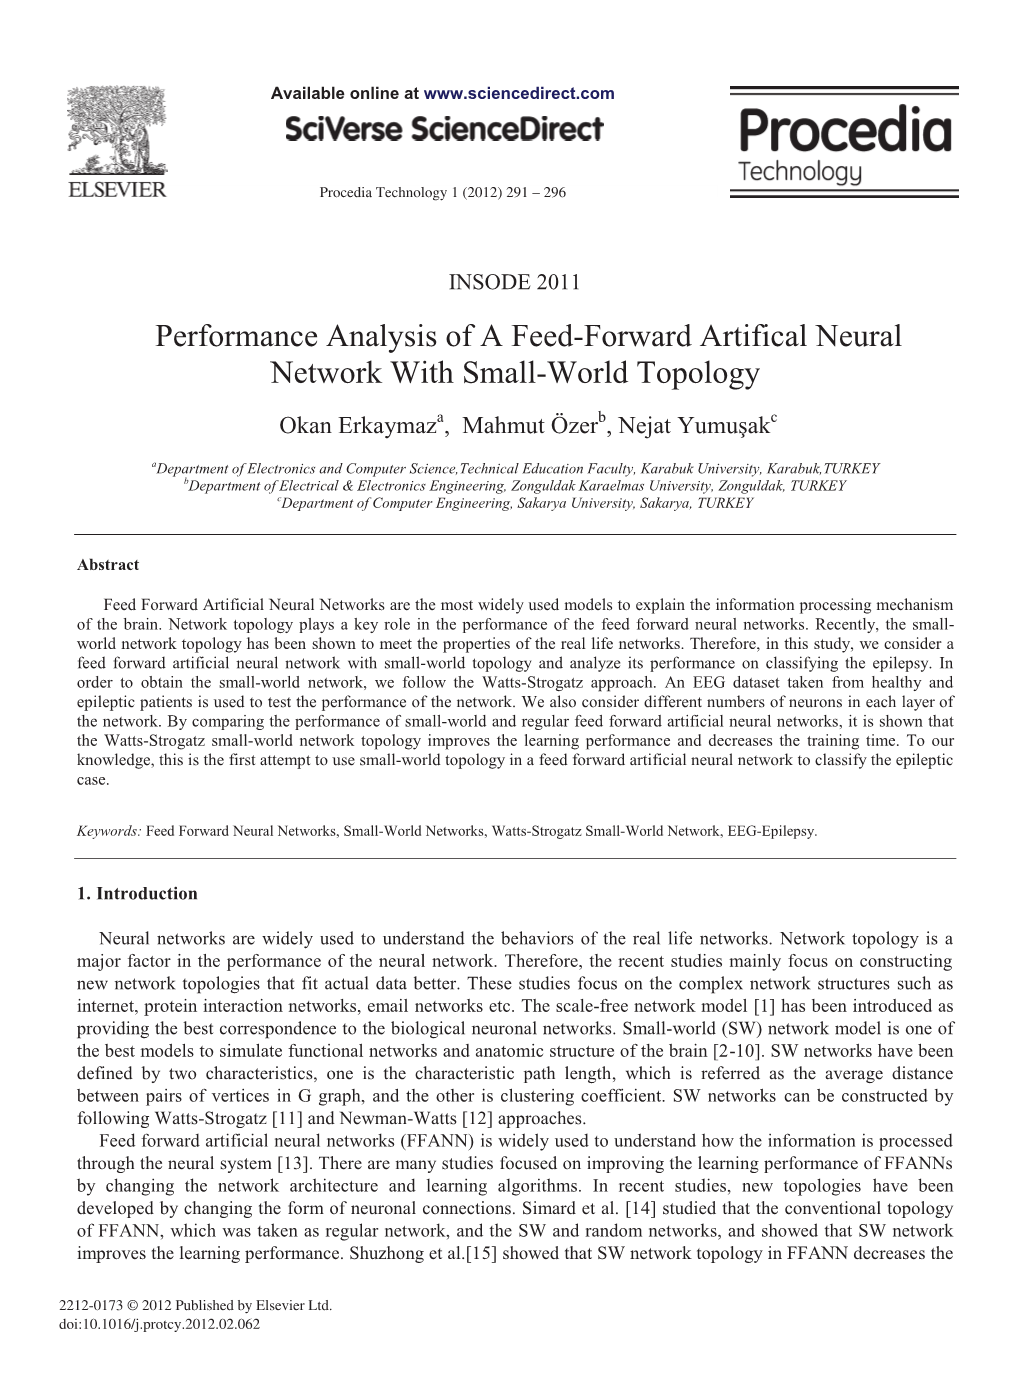 Performance Analysis of a Feed-Forward Artifical Neural Network with Small-World Topology